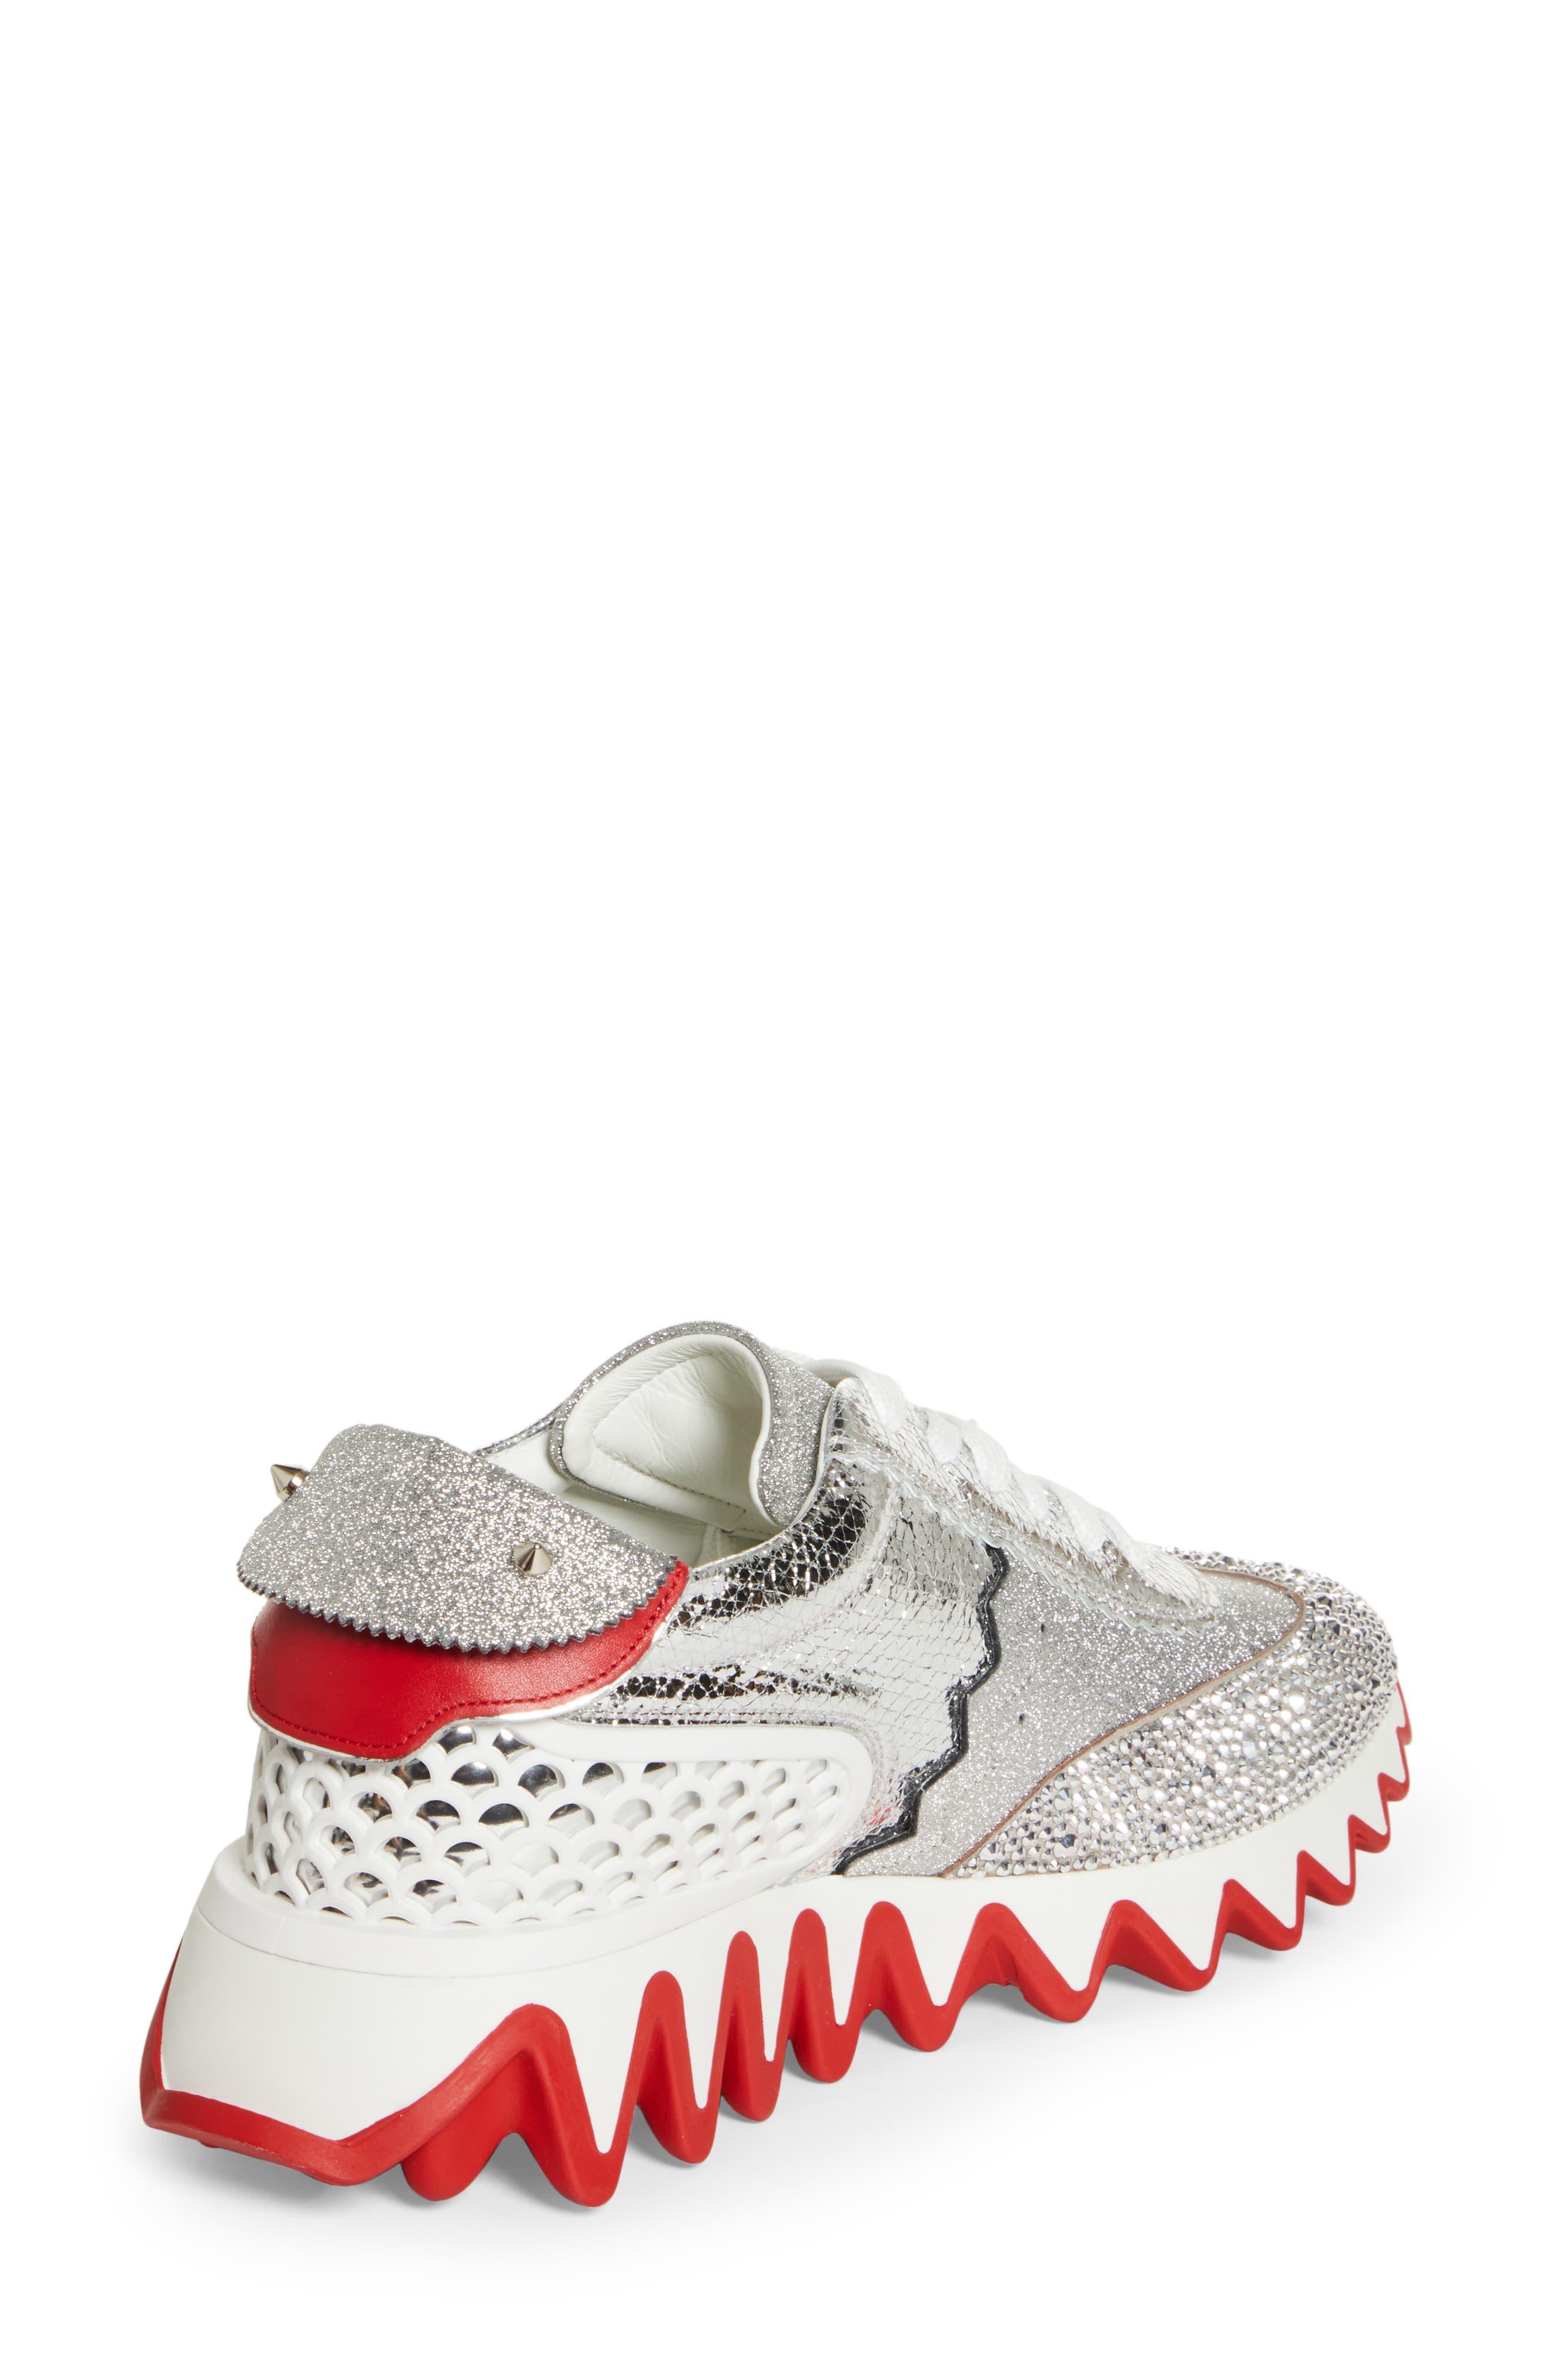 Christian Louboutin Loubishark Sneaker Donna Red Sole Trainer Size 39